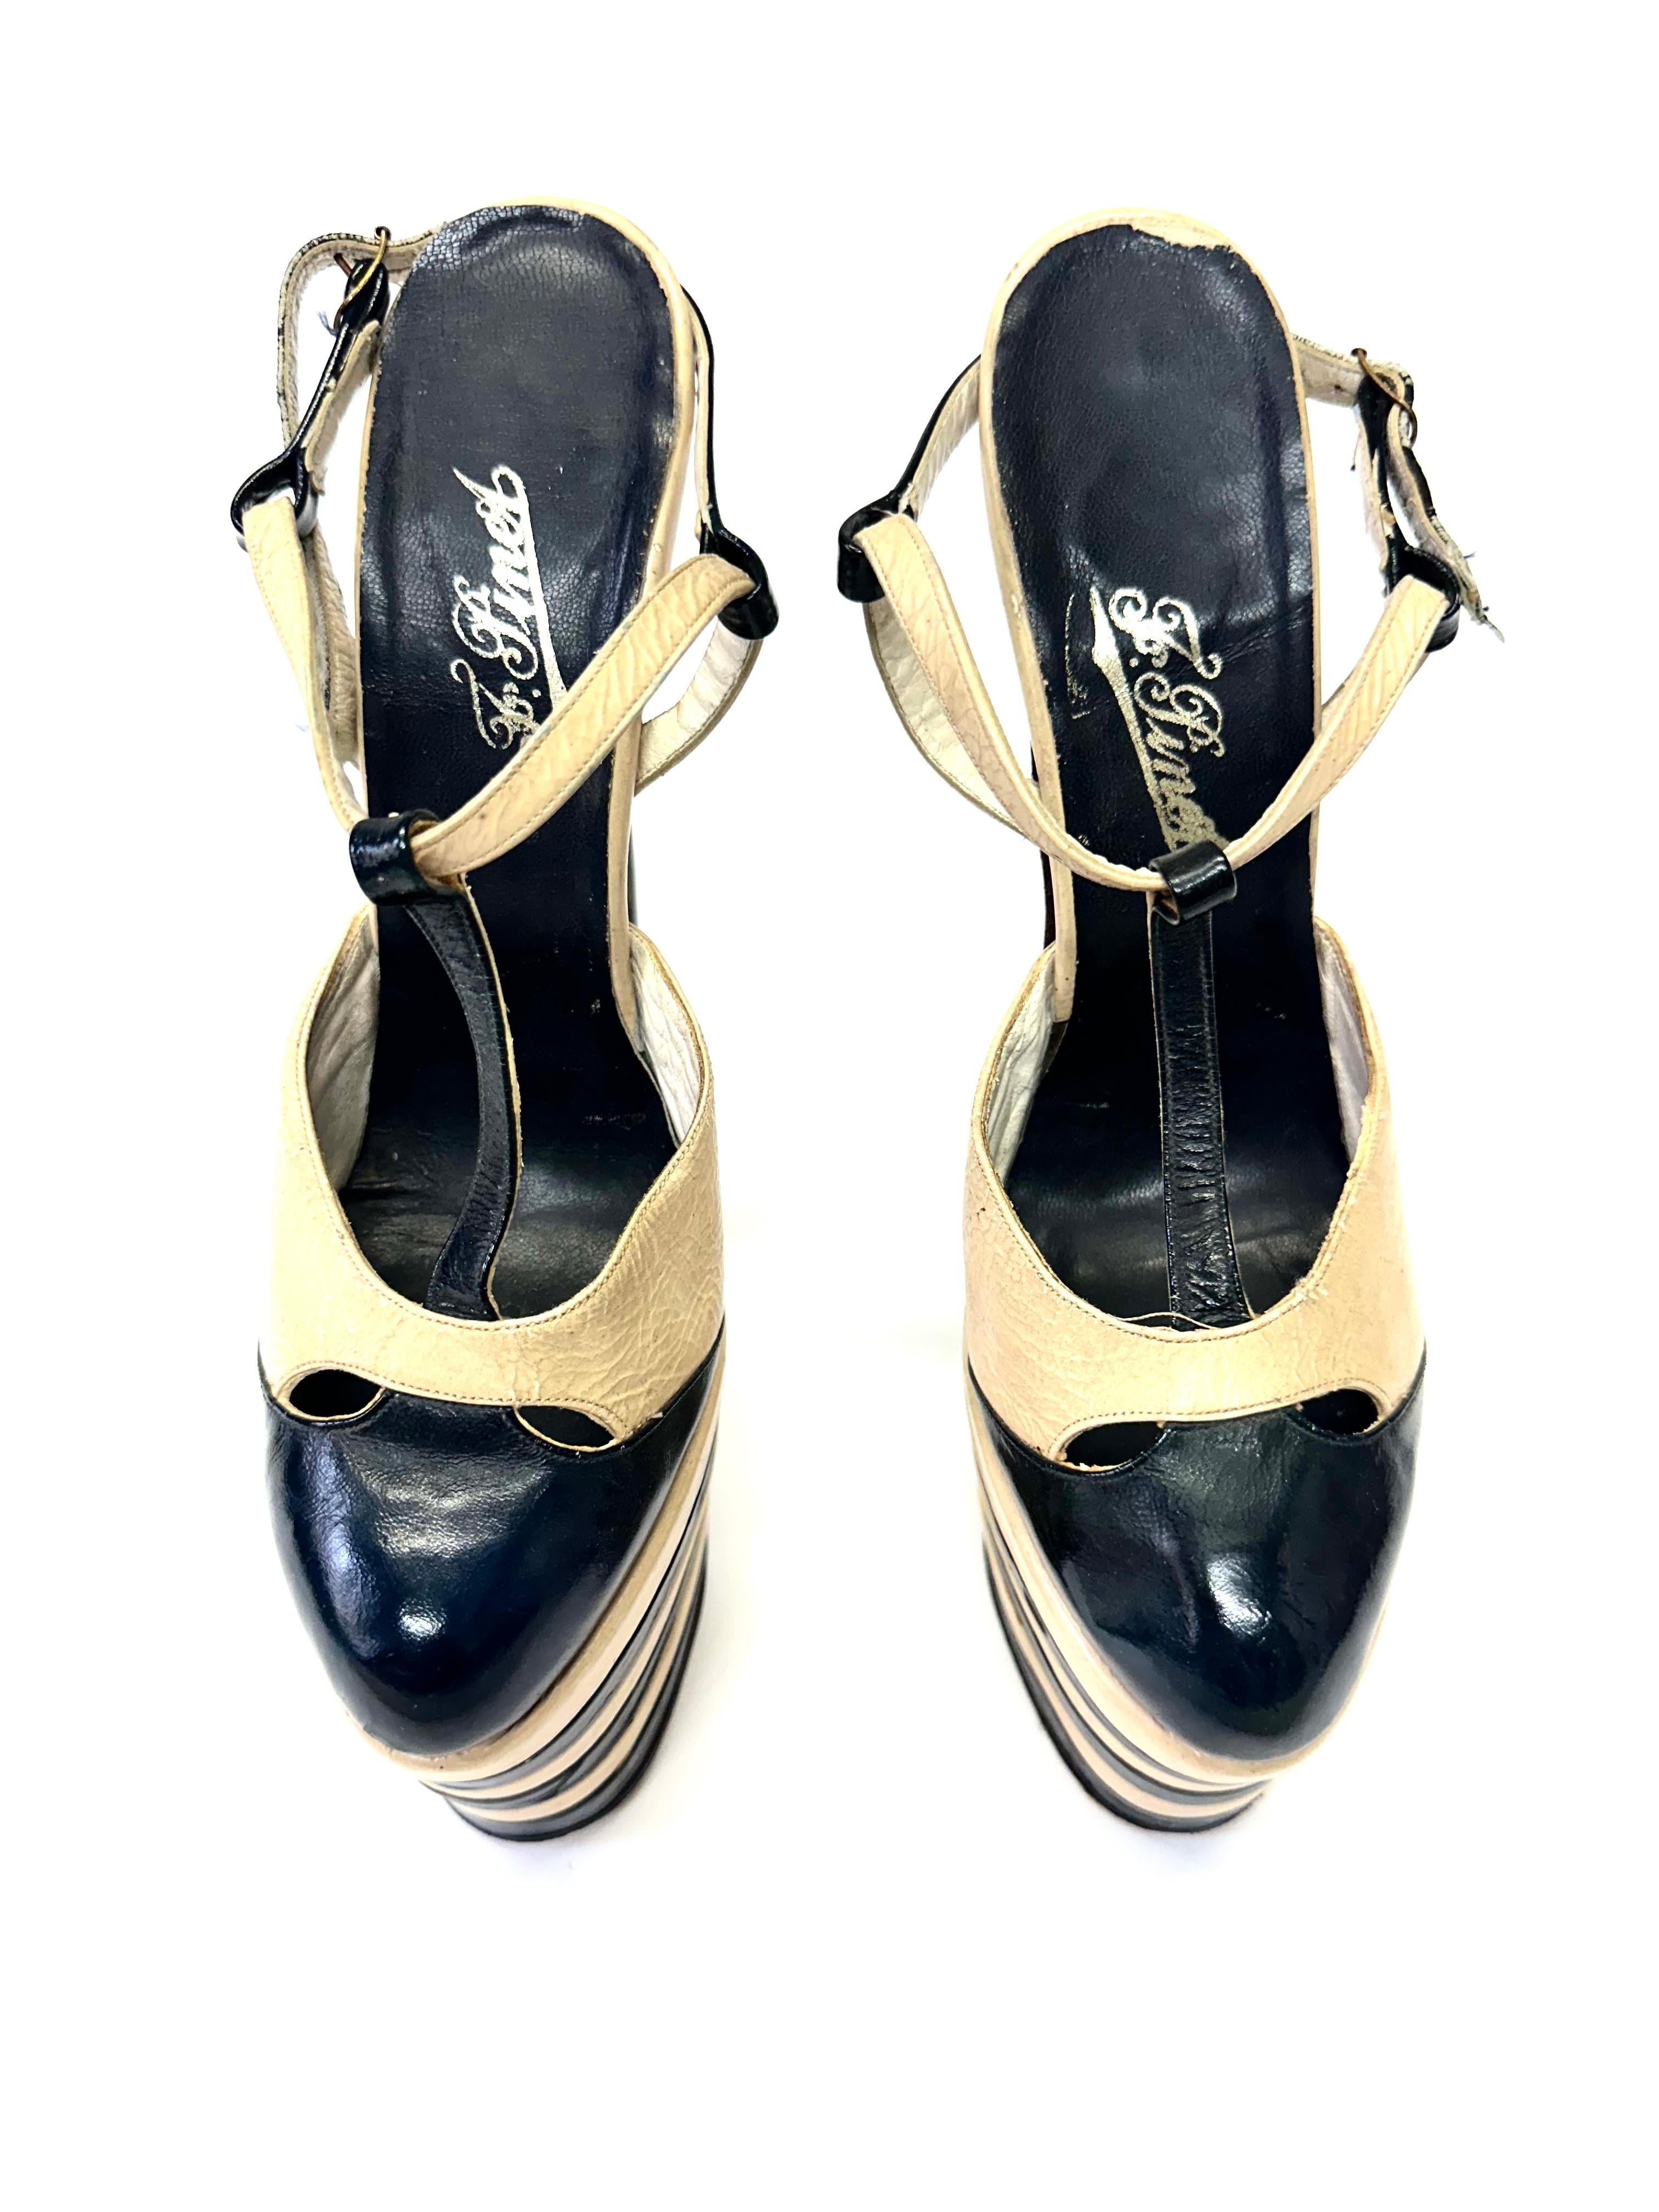 Francois Pinet, France black and white leather Platform fetish shoes, 1930s, with towering black and white patent striped elevated platforms and 23cm, 9in heels, t-bar fronts and heel straps, embossed to the sole size 40 

About the